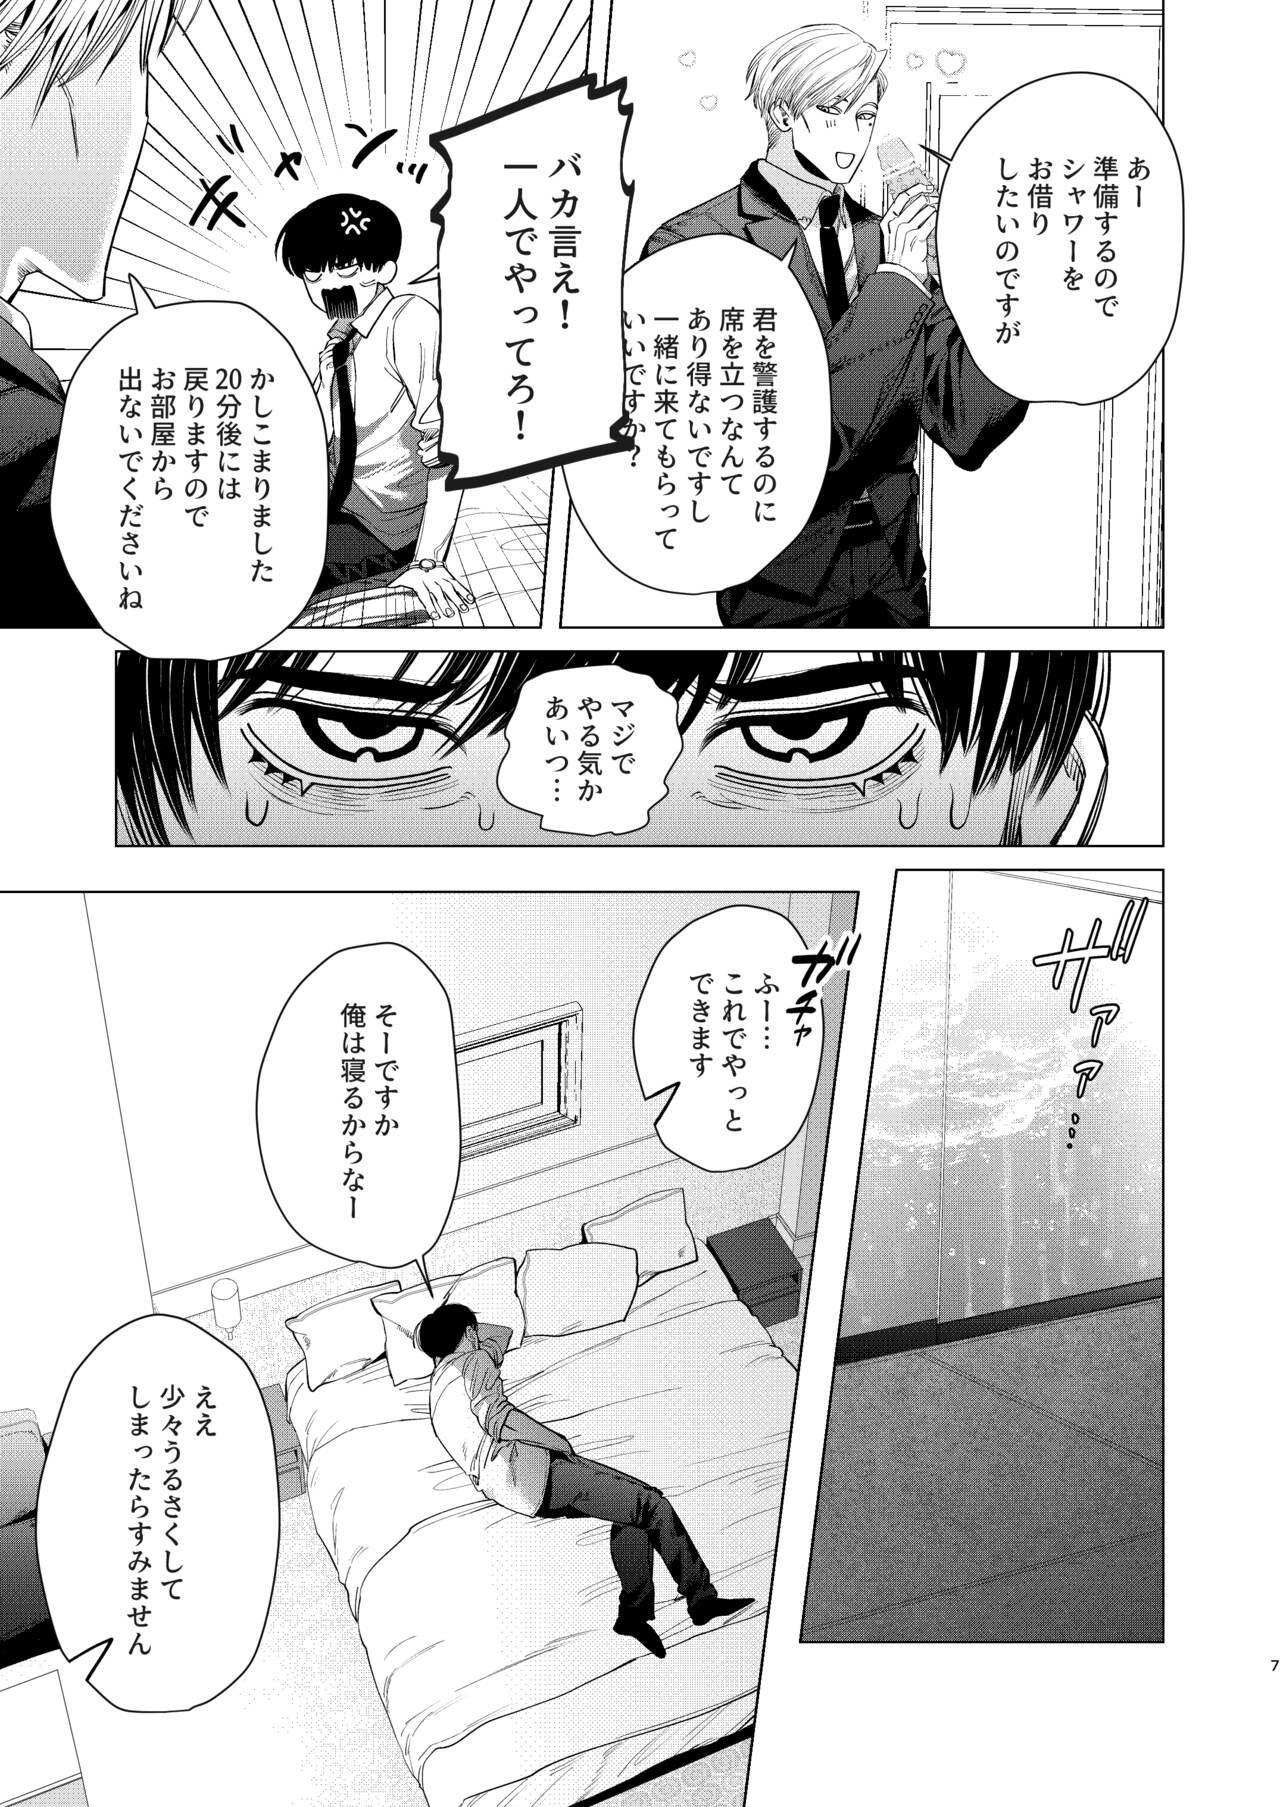 Pigtails Ore o Mamoru no wa Kinpatsu Gachimuchi Inran SP?! | The One Who Protects Me is the Blond Hairy Horny SP?! - Original Cousin - Page 6